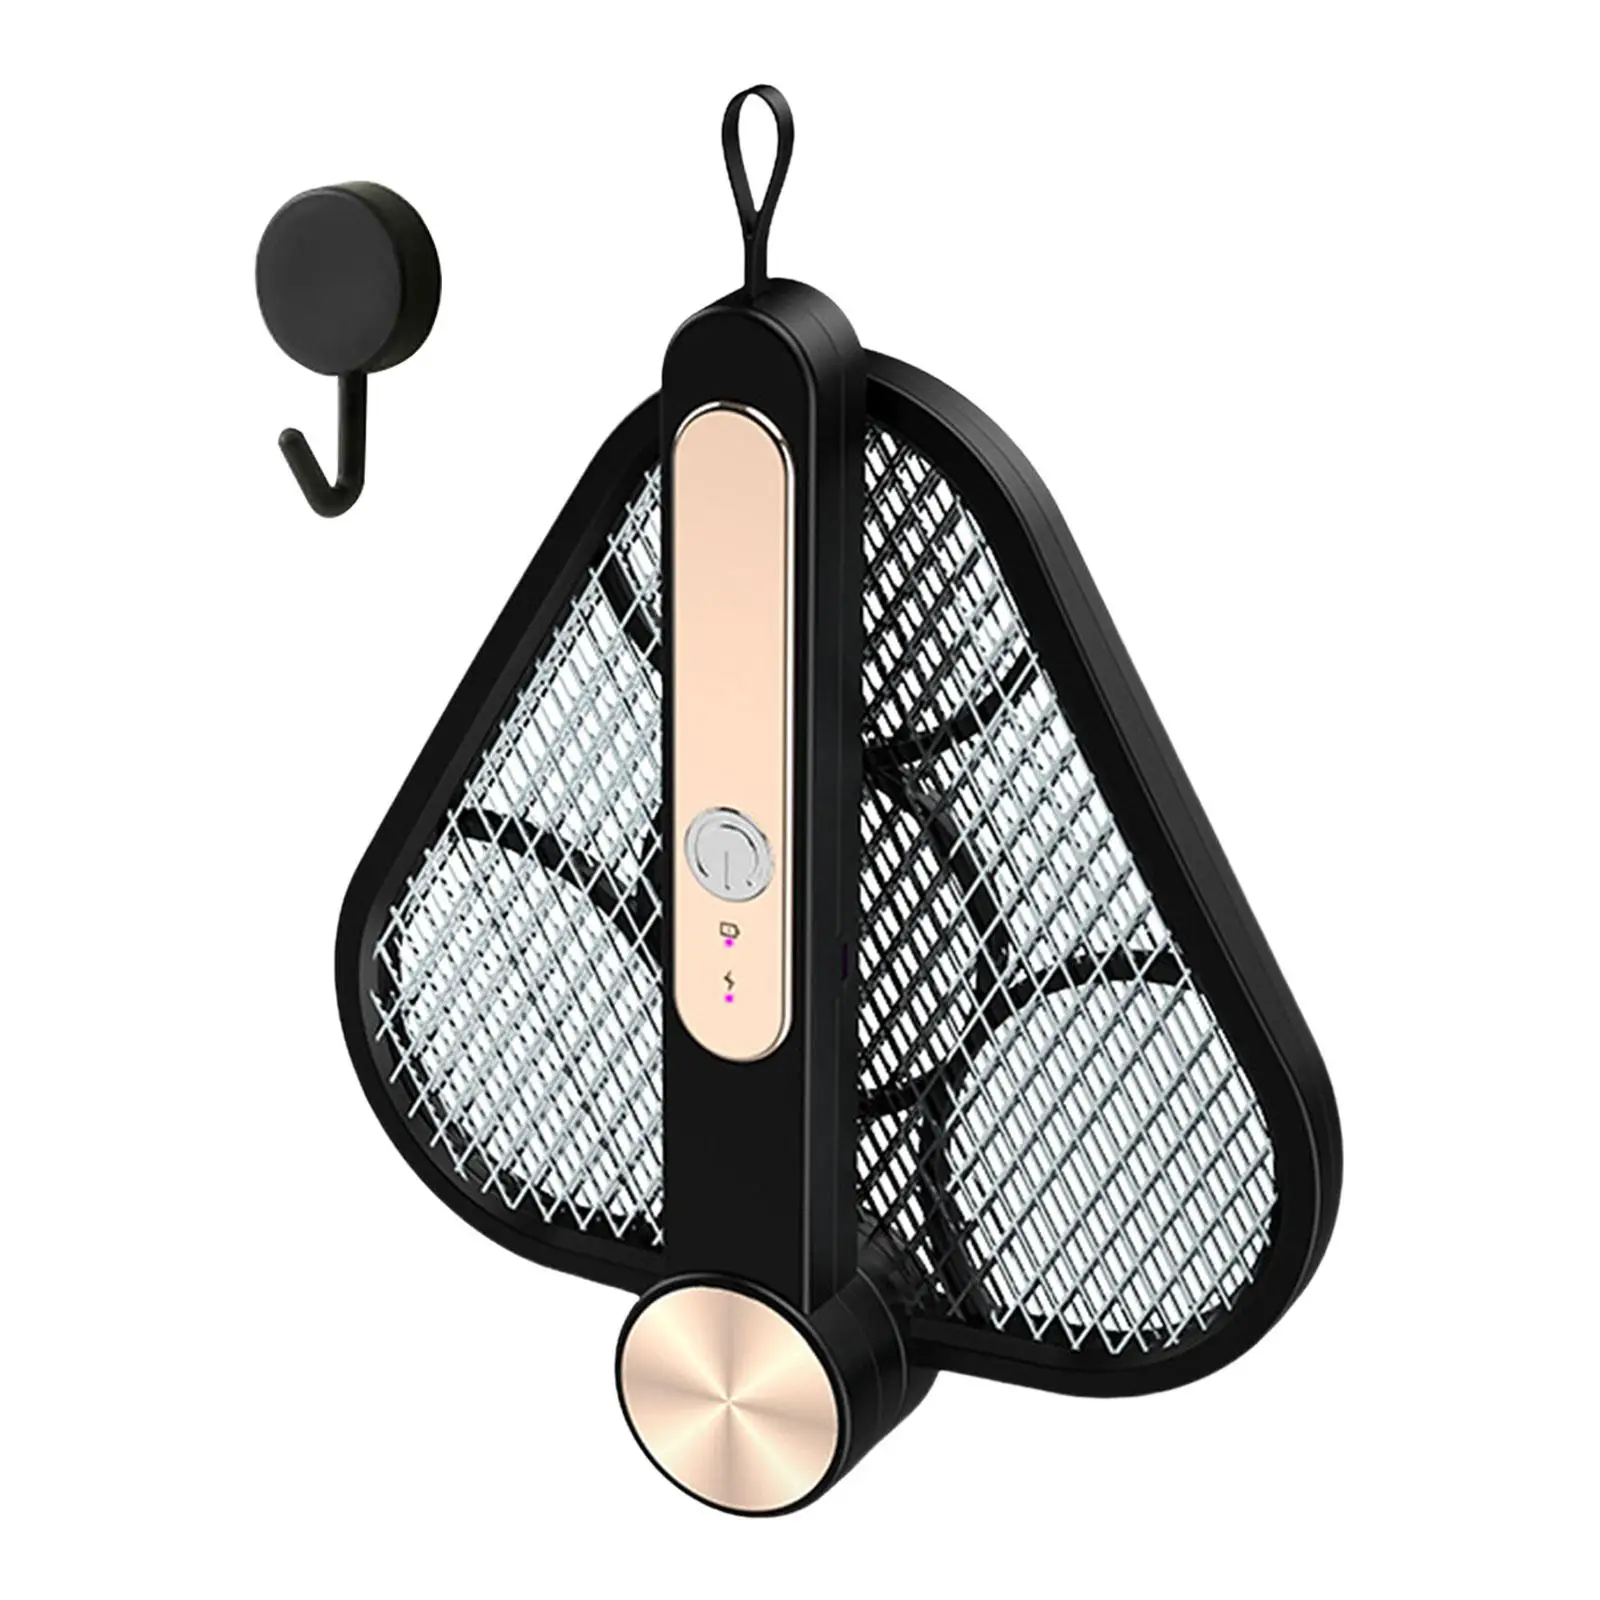 2 in 1 Foldable Mosquito Zapper Racket Bug Killer Lamp Rechargeable Bug Killer Swatter for Patio Office Home Kitchen Backyard